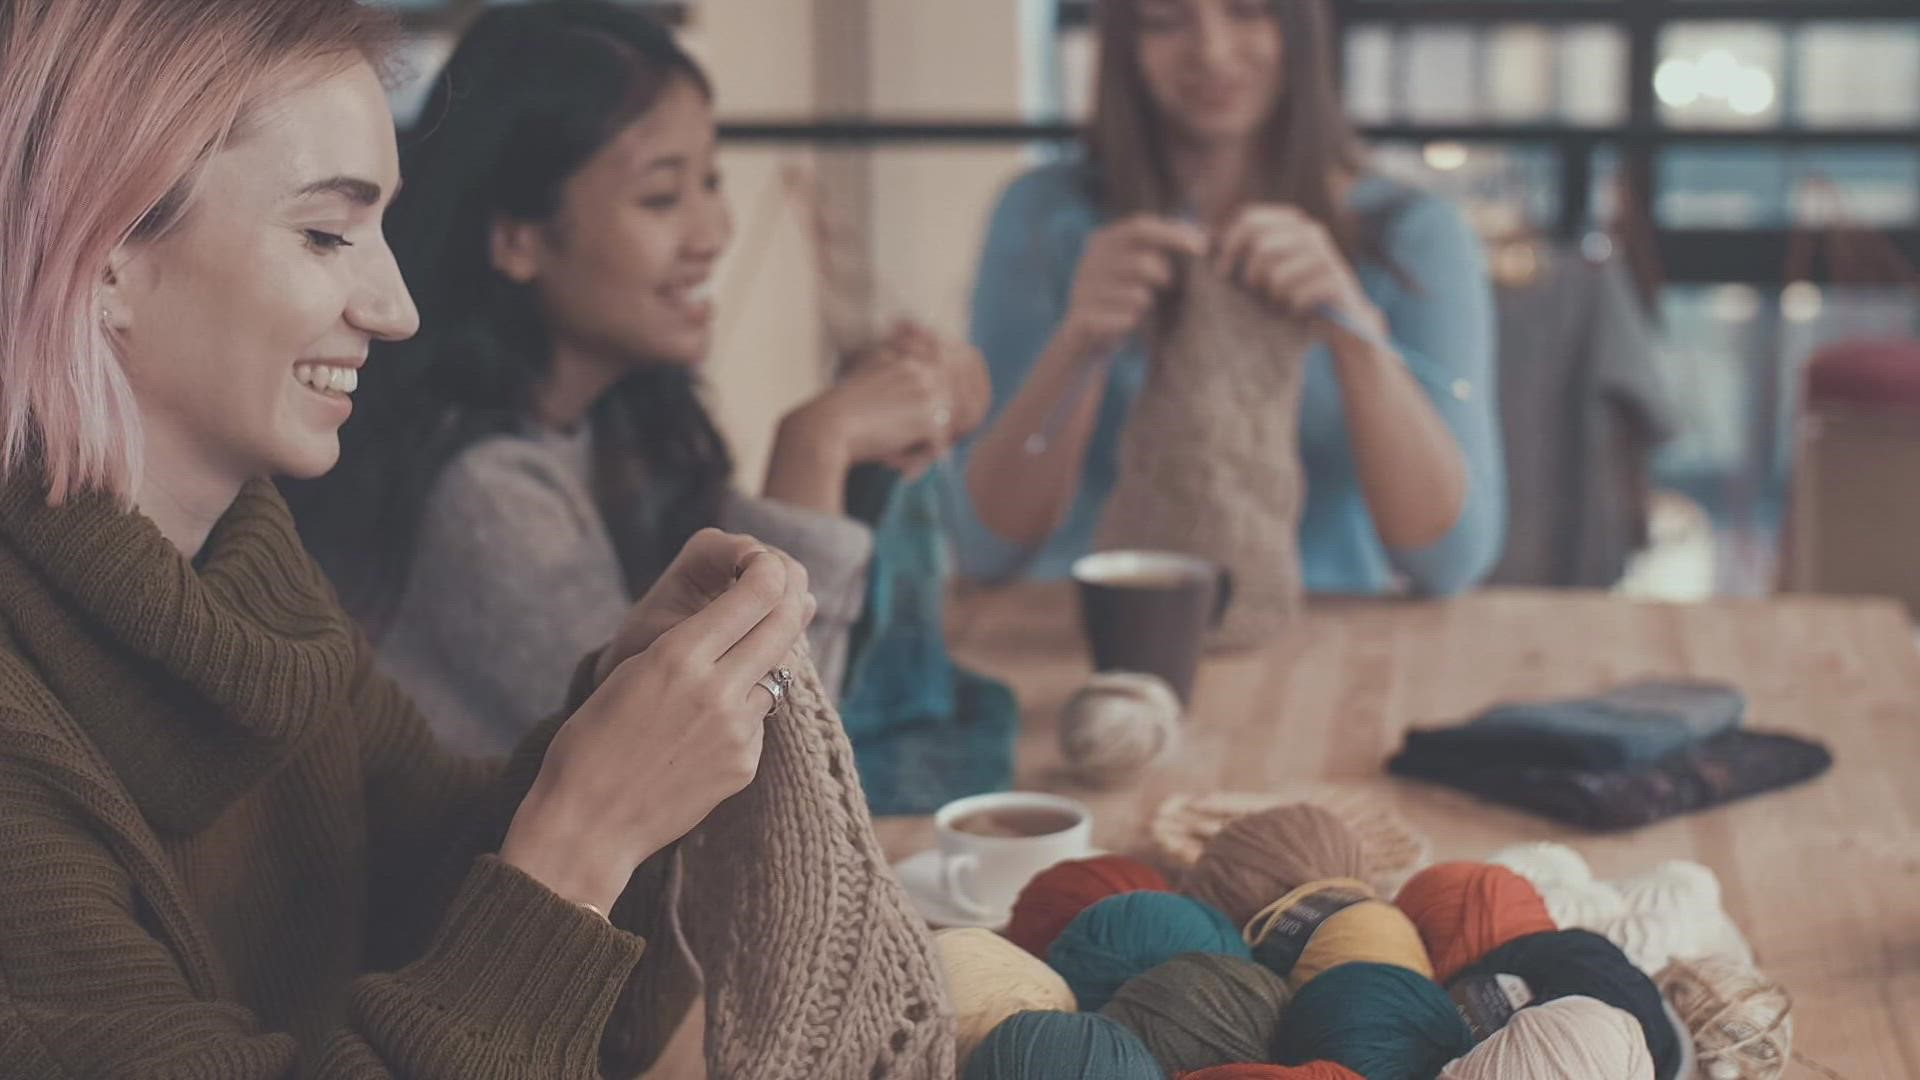 Knitting and crocheting has benefits for your physical and mental health.